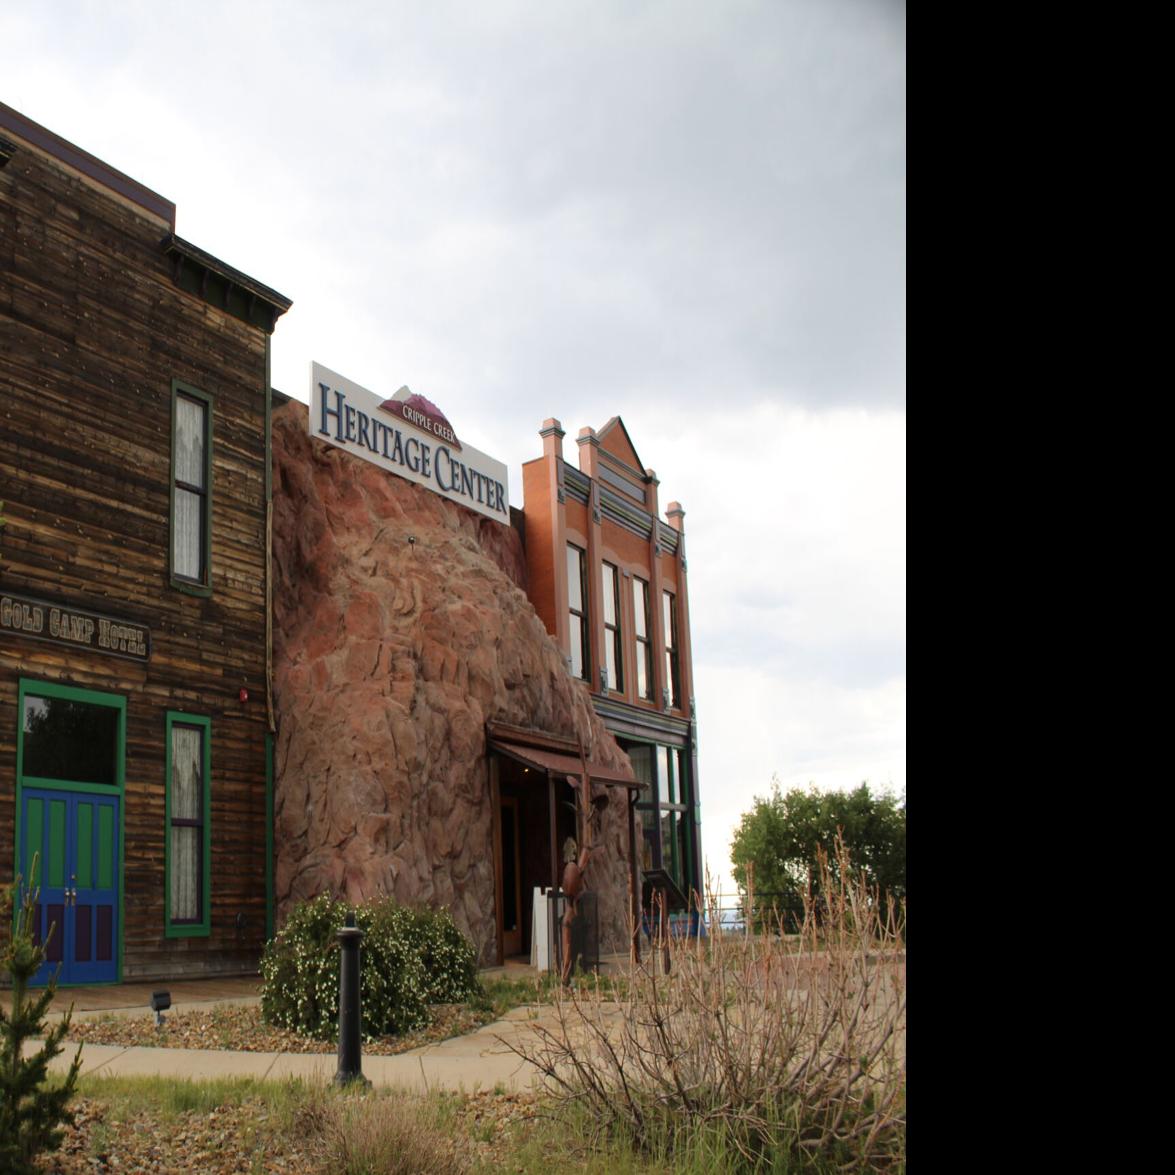 Cripple Creek Heritage and Information Center - All You Need to